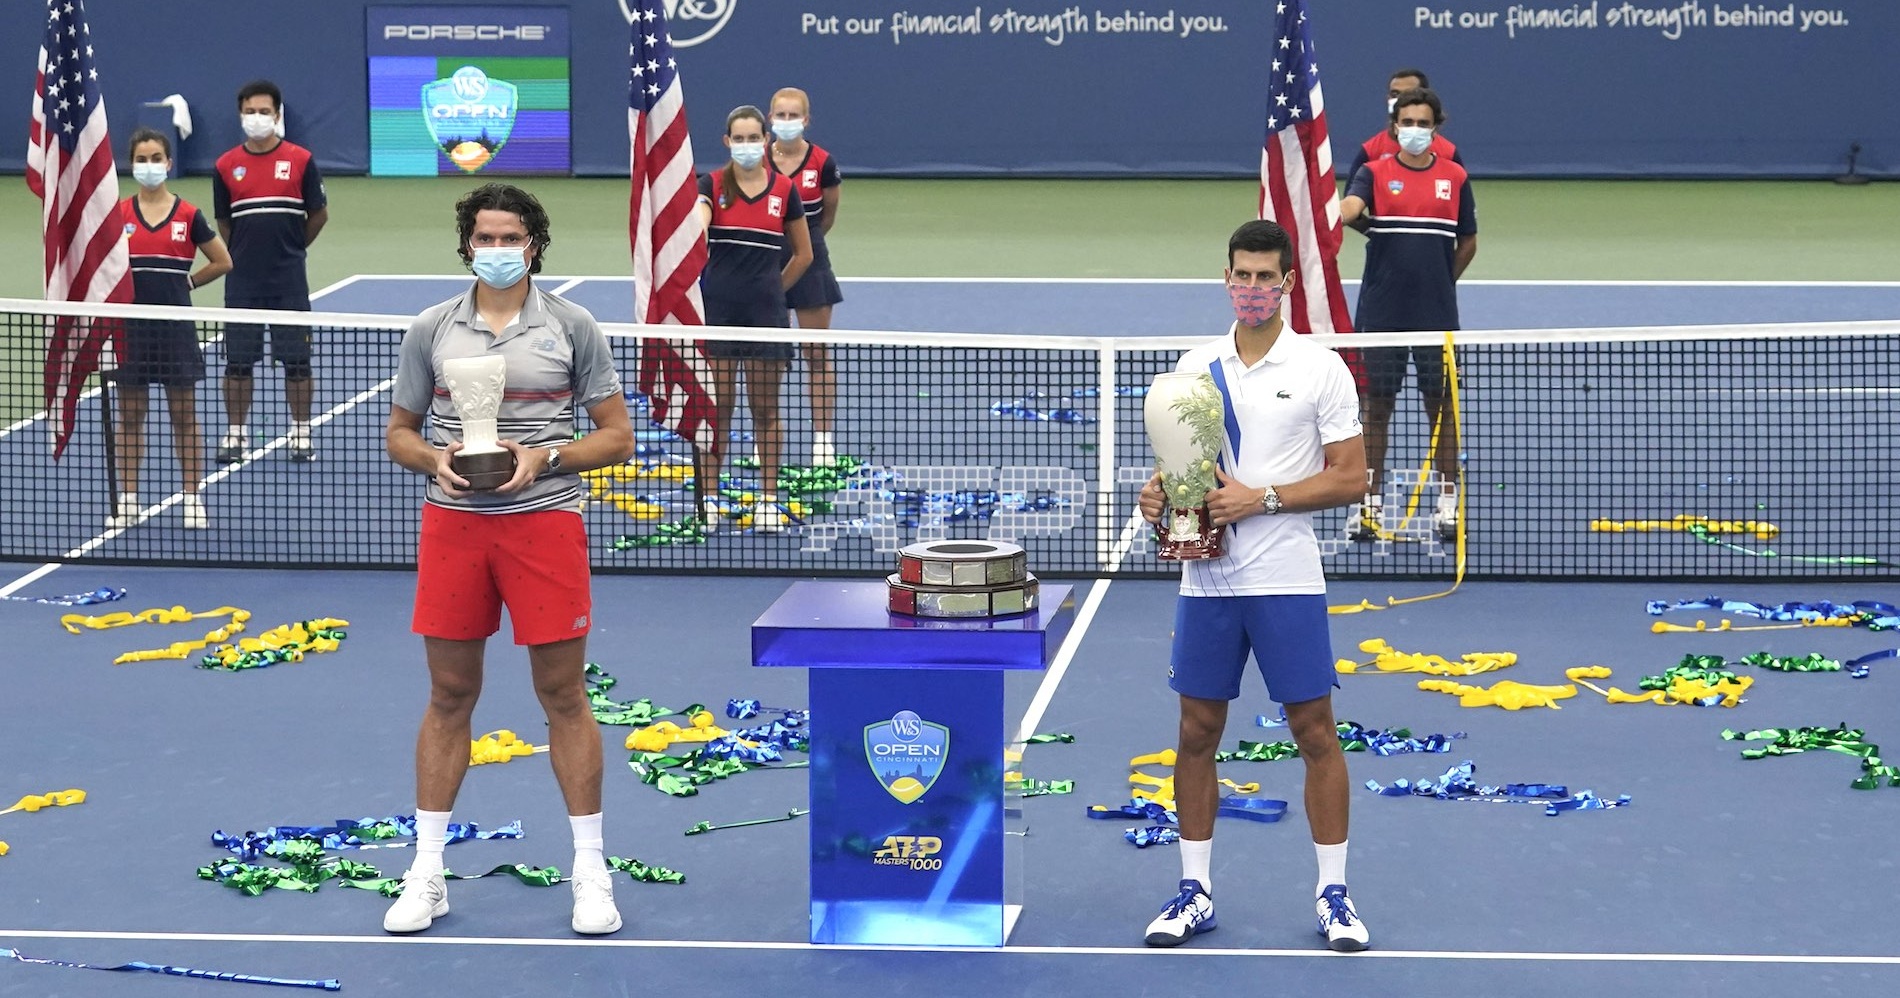 Milos Raonic and Novak Djokovic after 2020 Southern and Western final, New York, August 2020